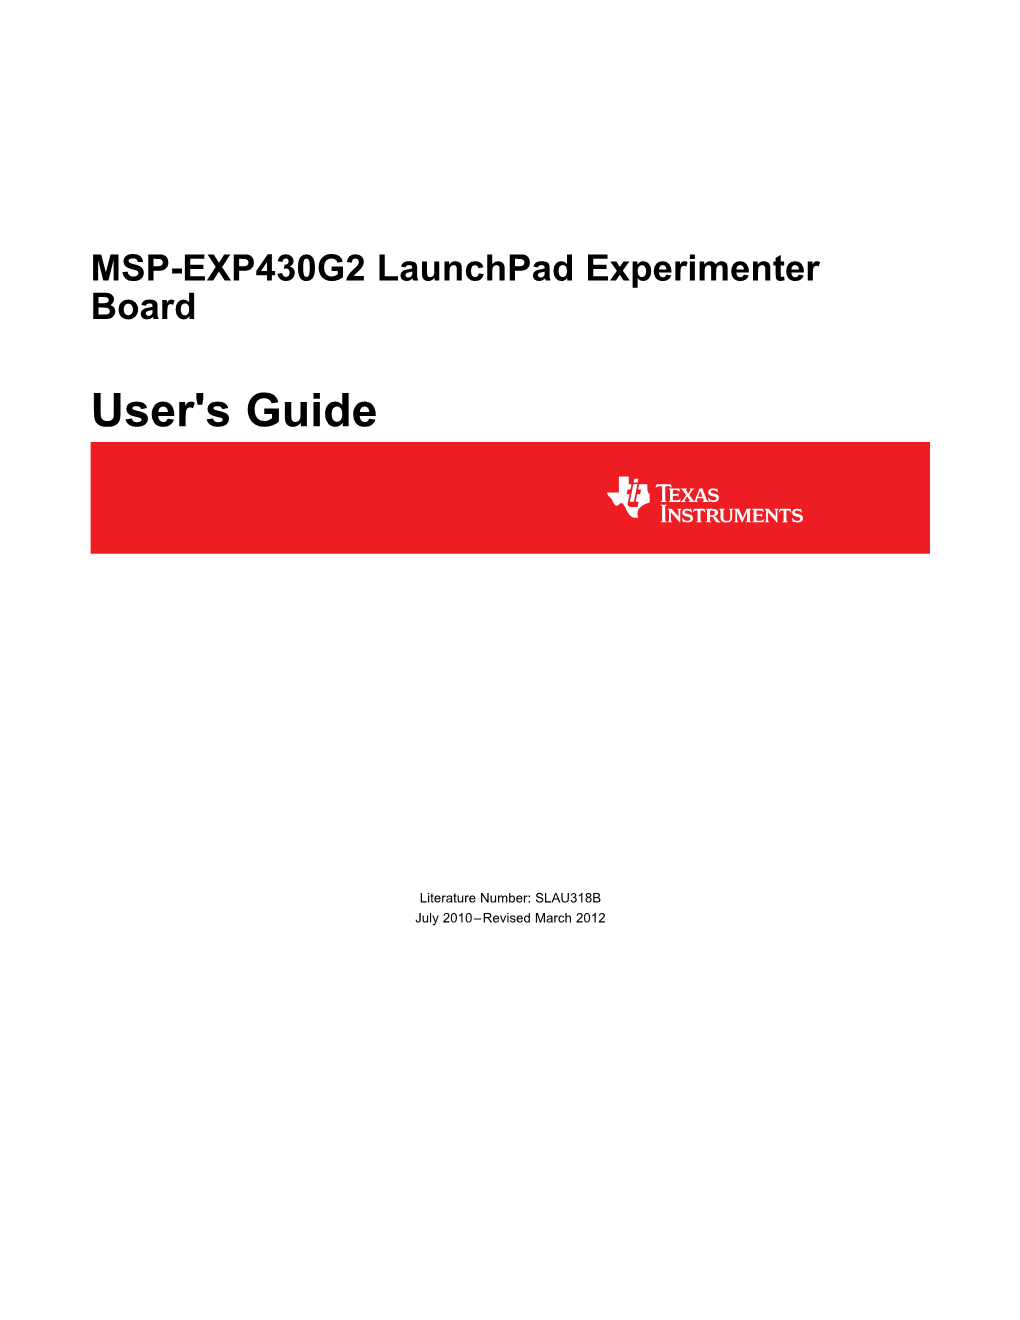 MSP-EXP430G2 Launchpad Experimenter Board User's Guide